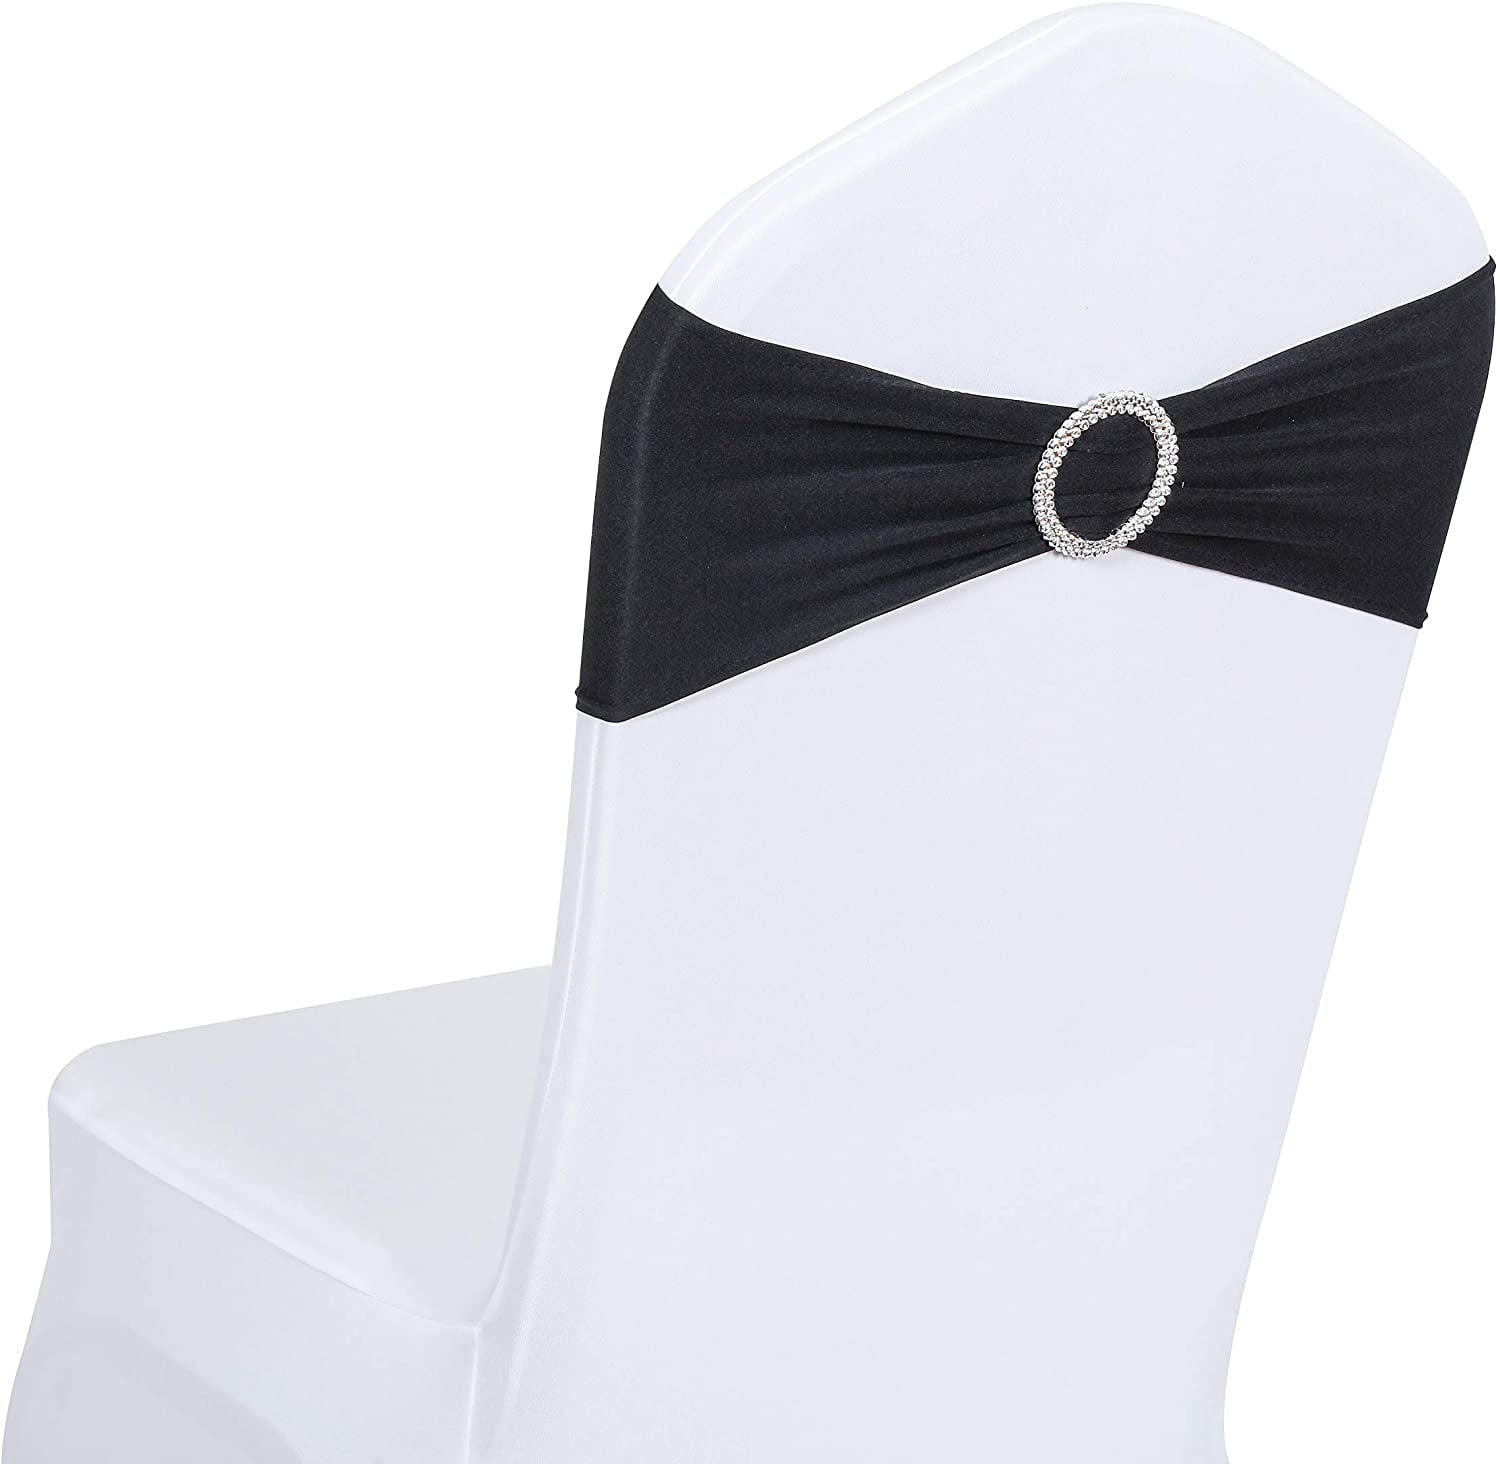 10Pcs Spandex Stretch Wedding Chair Cover Bow Band Sashes With Buckle Slider NEW 